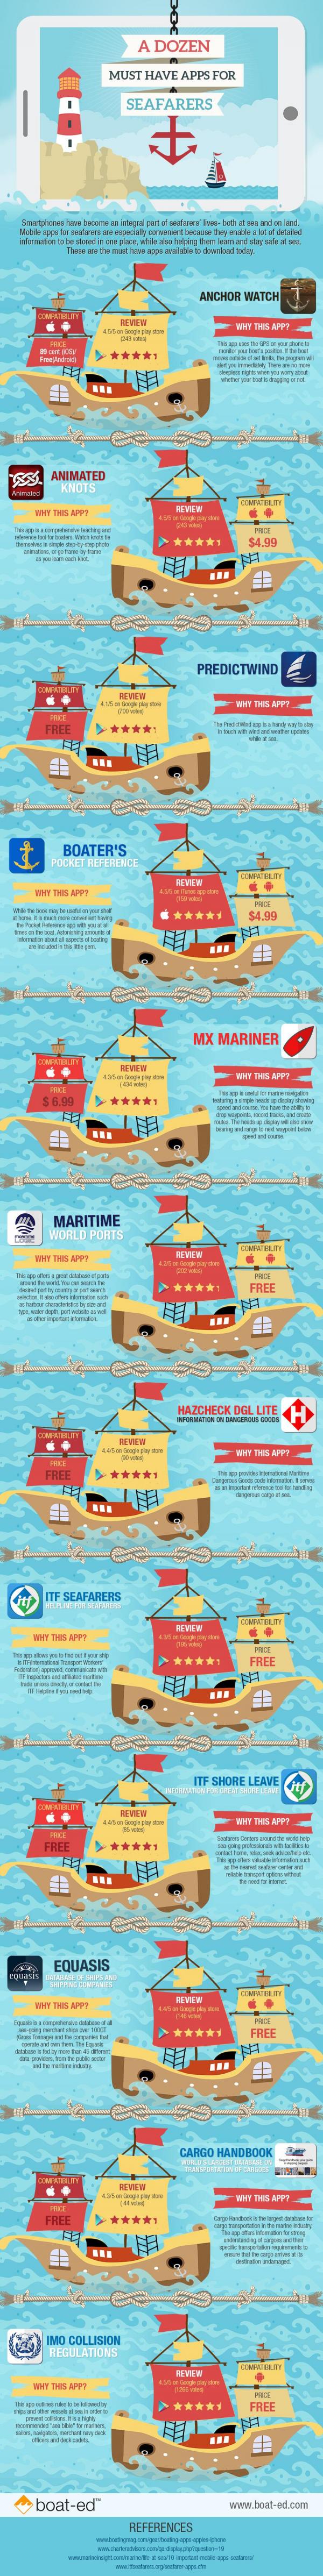 A Dozen Must Have Apps for Seafarers